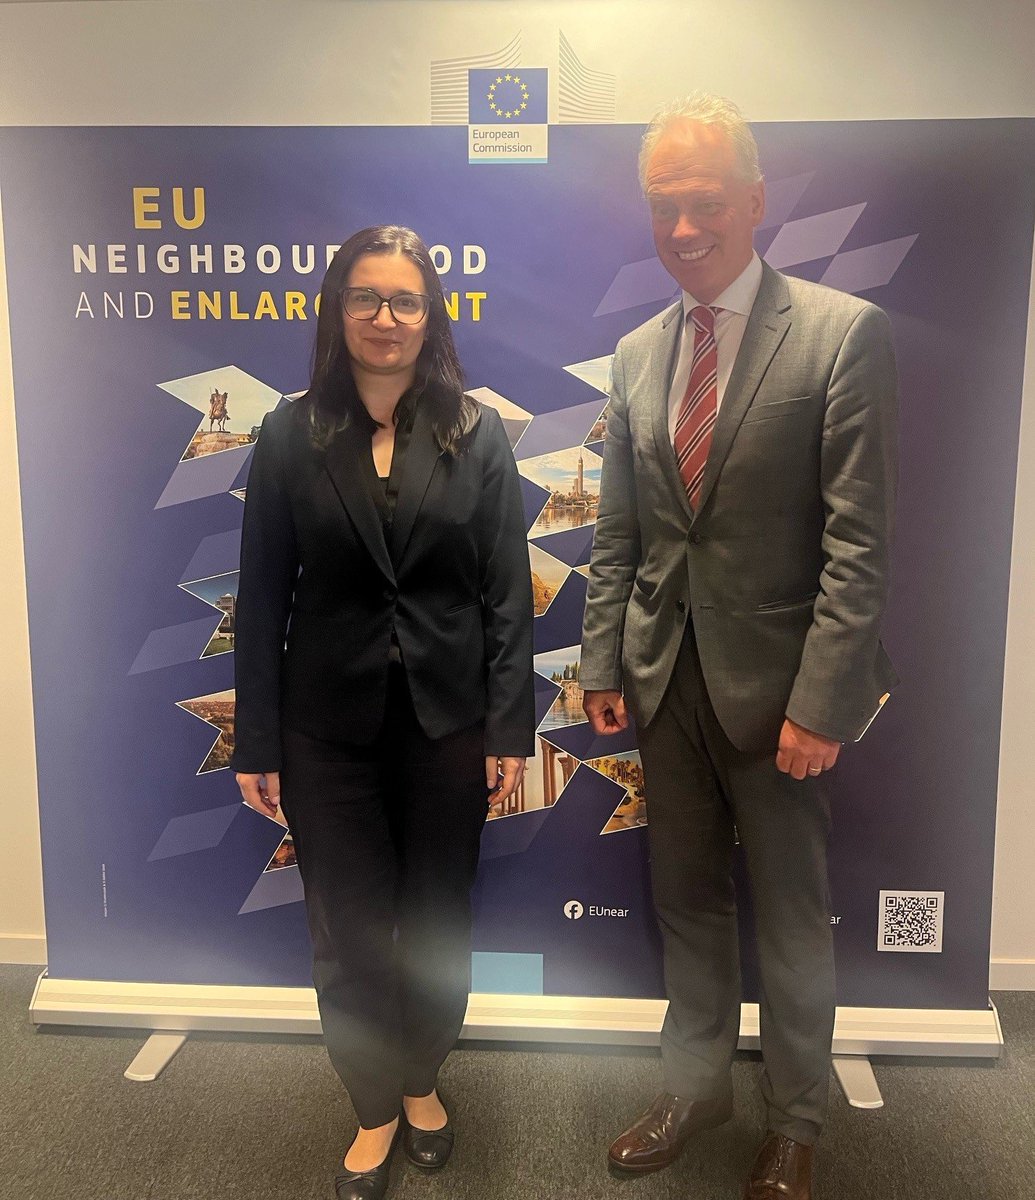 A pleasure to meet 🇲🇩 Deputy Prime Minister for European Integration @cgherasimov today. Good discussion on next steps on #Moldova’s #EU accession path, preparations for the 🇲🇩 Growth Plan, & how @eu_near can help. 🤝 #StrongerTogether #EUEnlargement